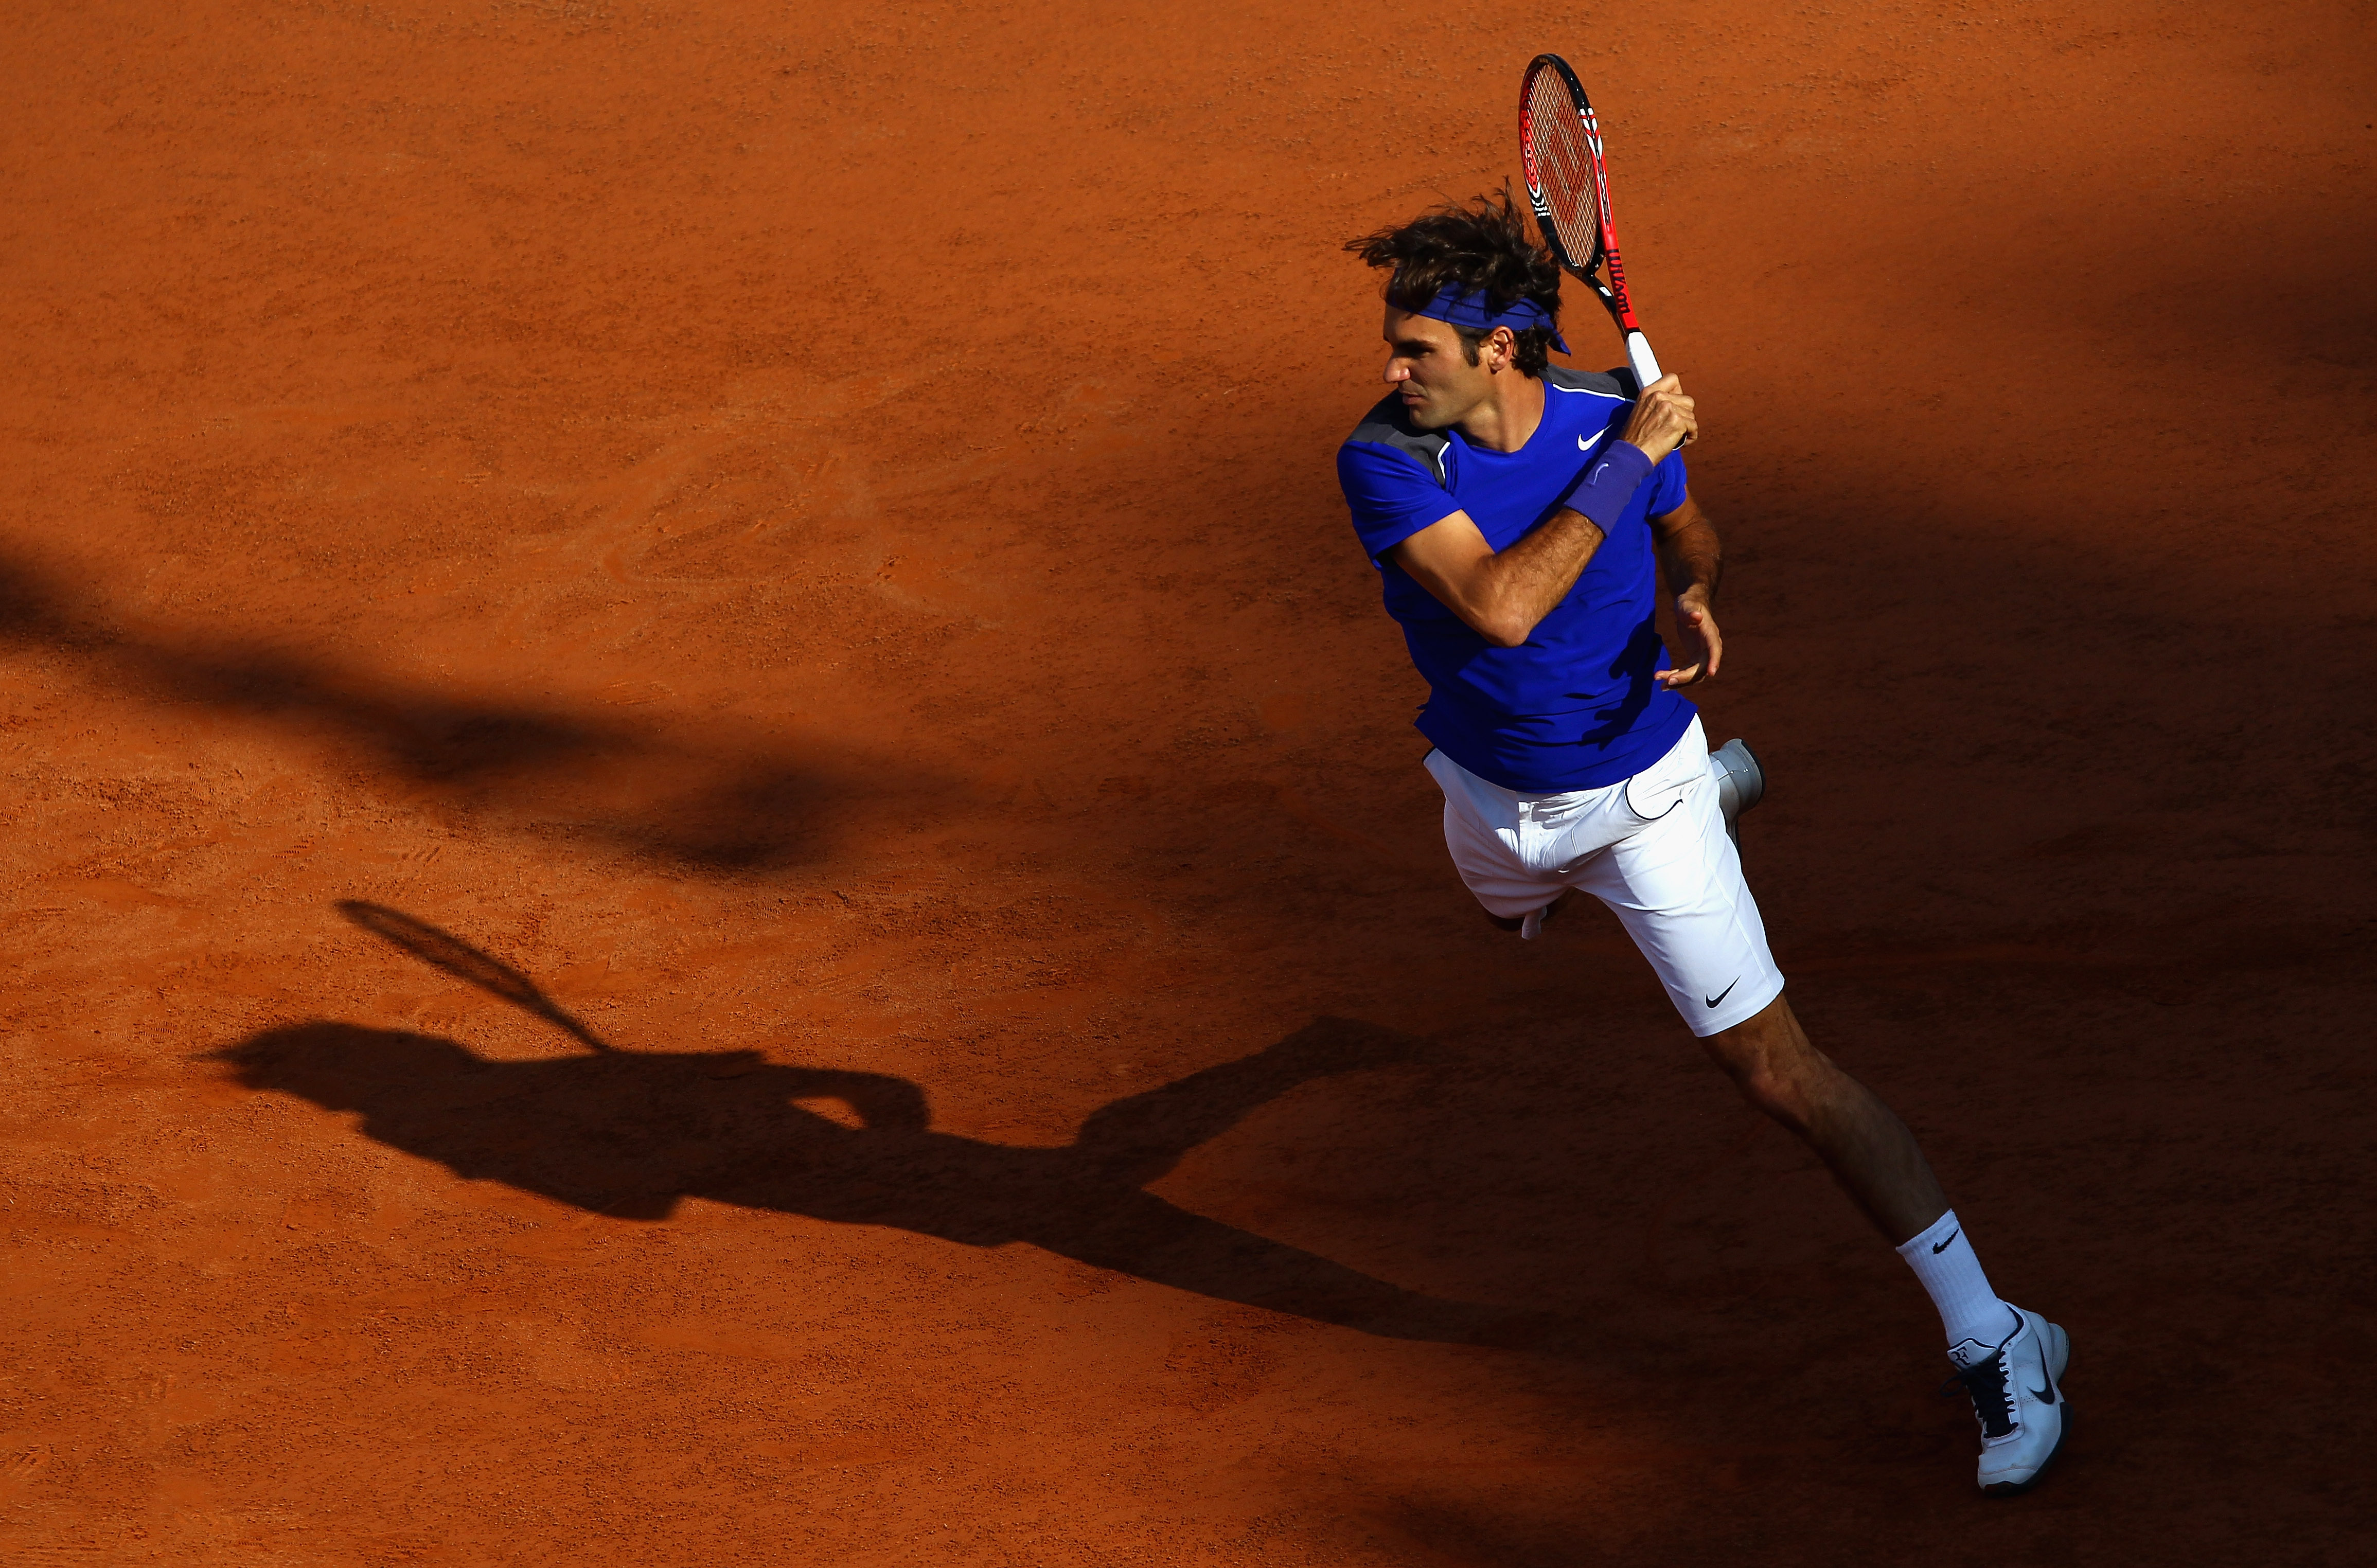 ROME, ITALY - MAY 12:  Roger Federer of Switzerland in action during his third round match against Richard Gasquet of France during day five of the Internazoinali BNL D'Italia at the Foro Italico Tennis Centre on May 12, 2011 in Rome, Italy.  (Photo by Cl